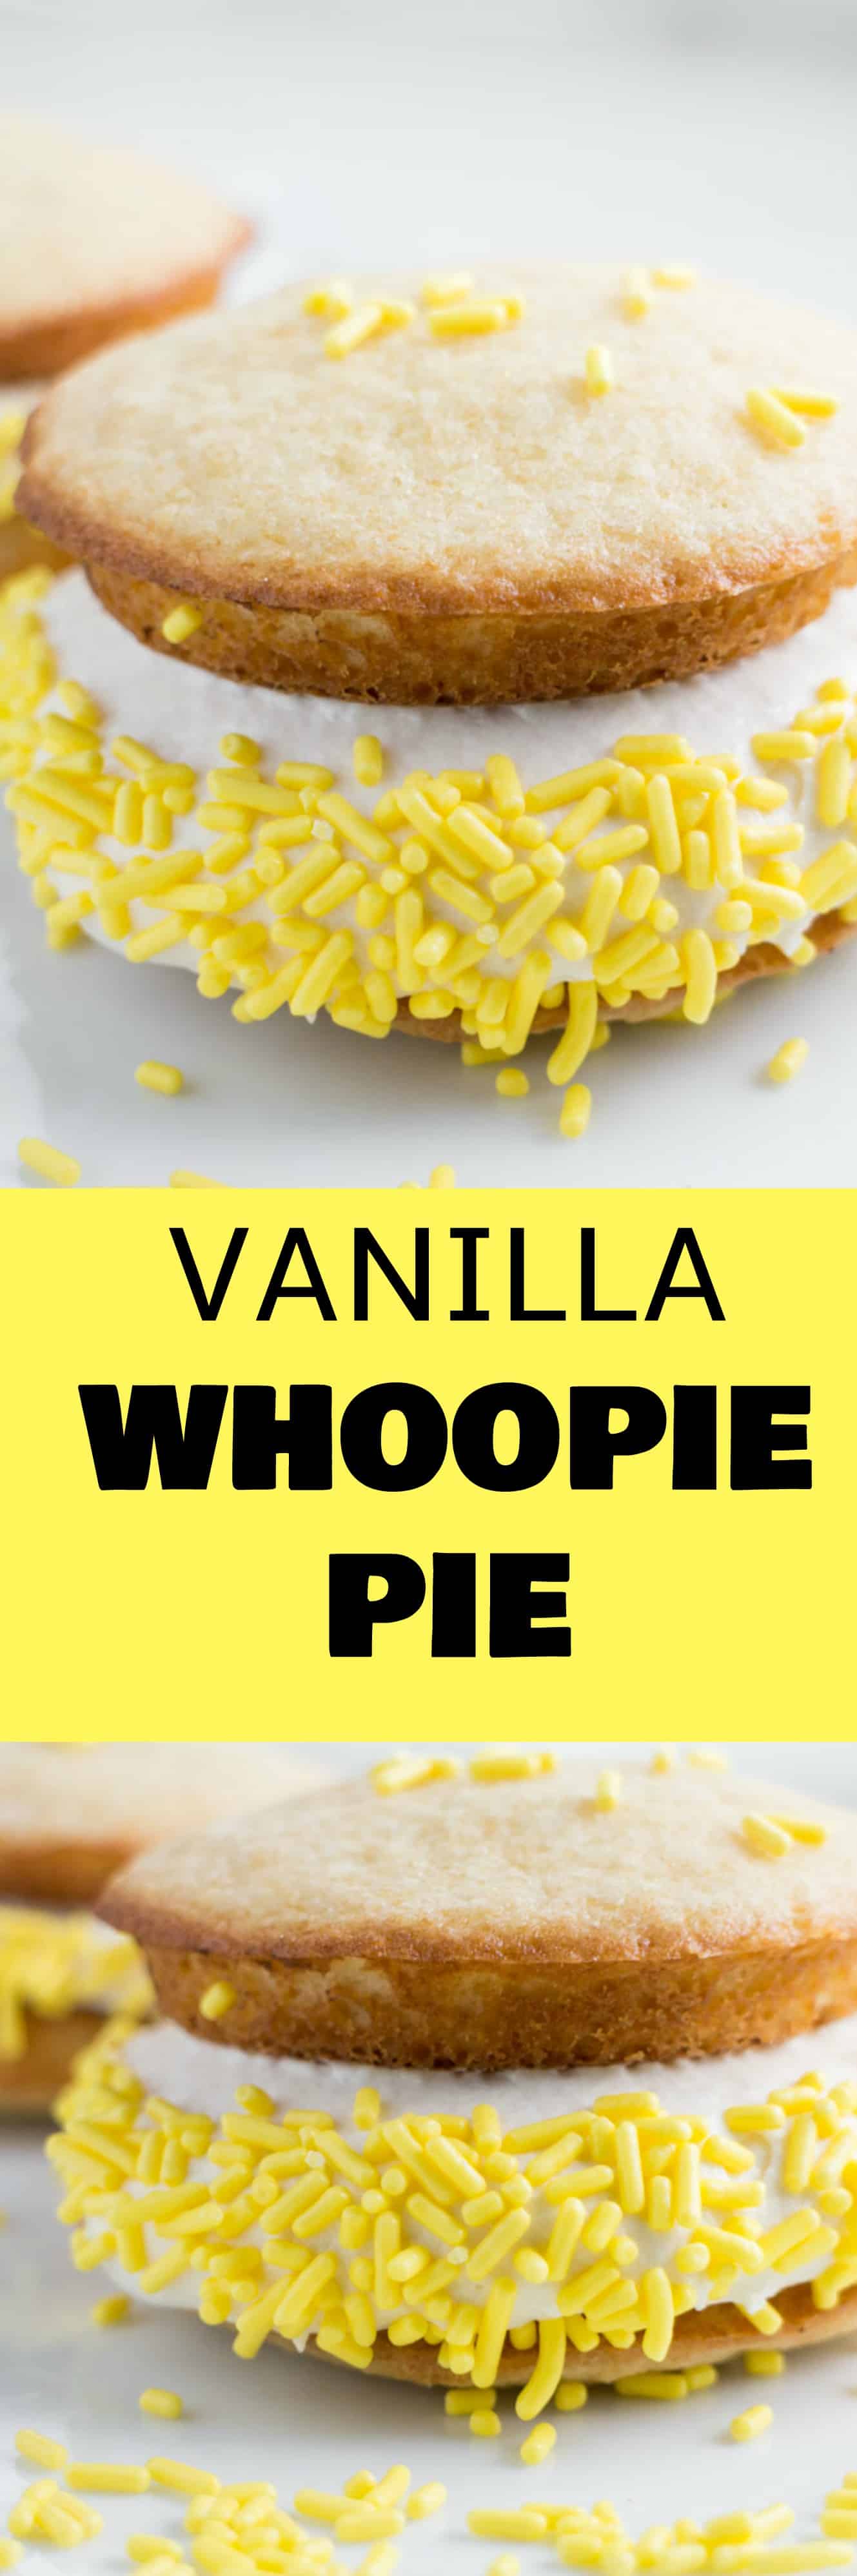 Vanilla Whoopie Pie Recipe With Marshmallow Cream Filling. These whoopie pies taste like cake with creamy marshmallow filling inside. These taste just like the whoopie pies you buy at the Amish market!